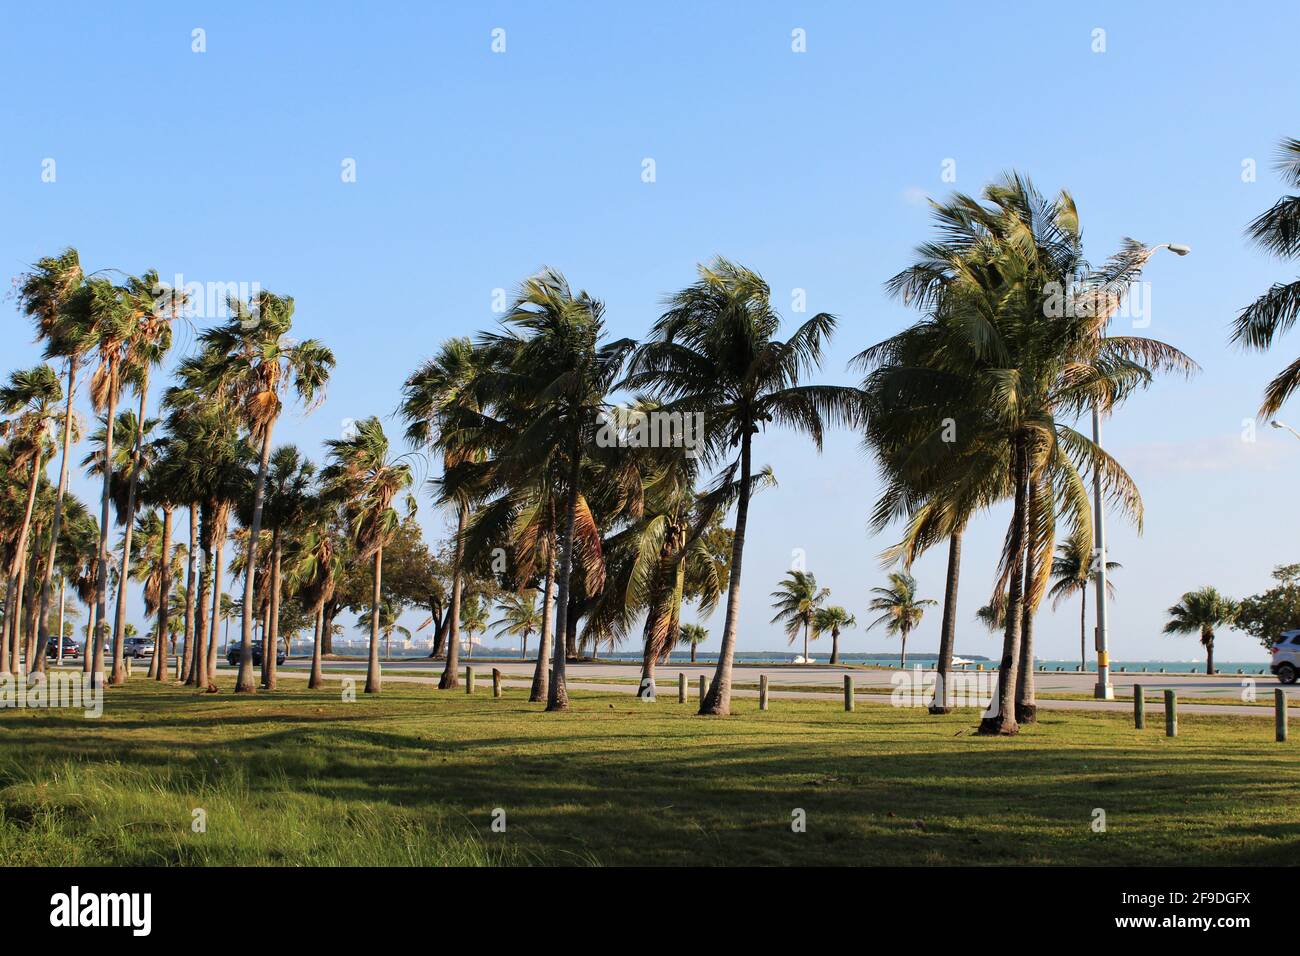 Beautiful sunny day in Key Biscayne, Florida. Large palm trees with ocean background and boats. Stock Photo